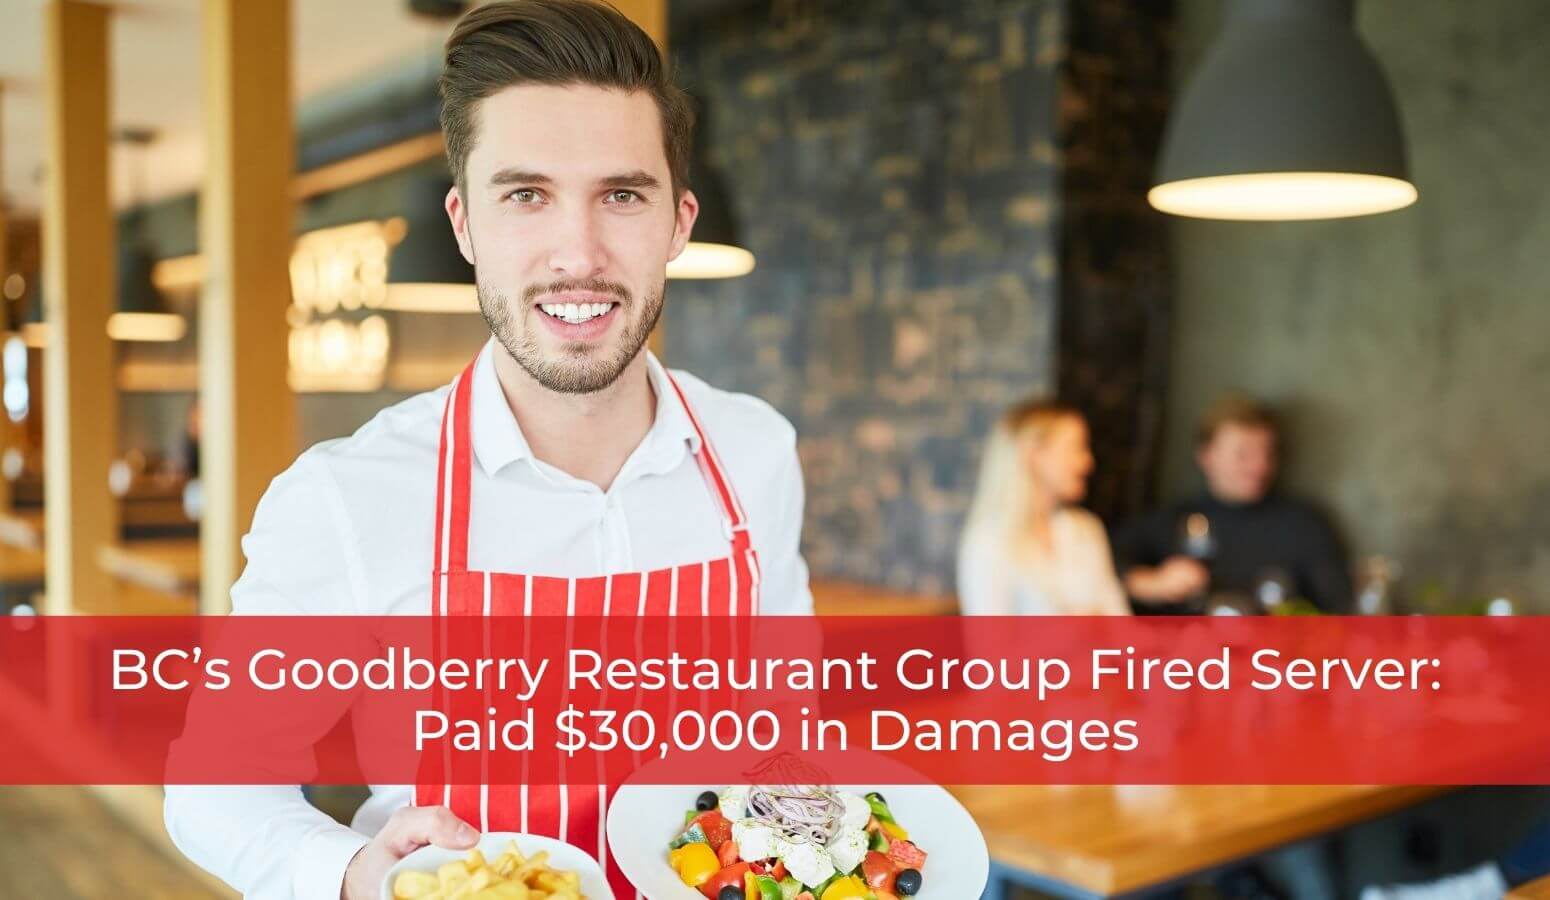 Featured image for “BC’s Goodberry Restaurant Group Fired Server: Paid $30,000 in Damages”